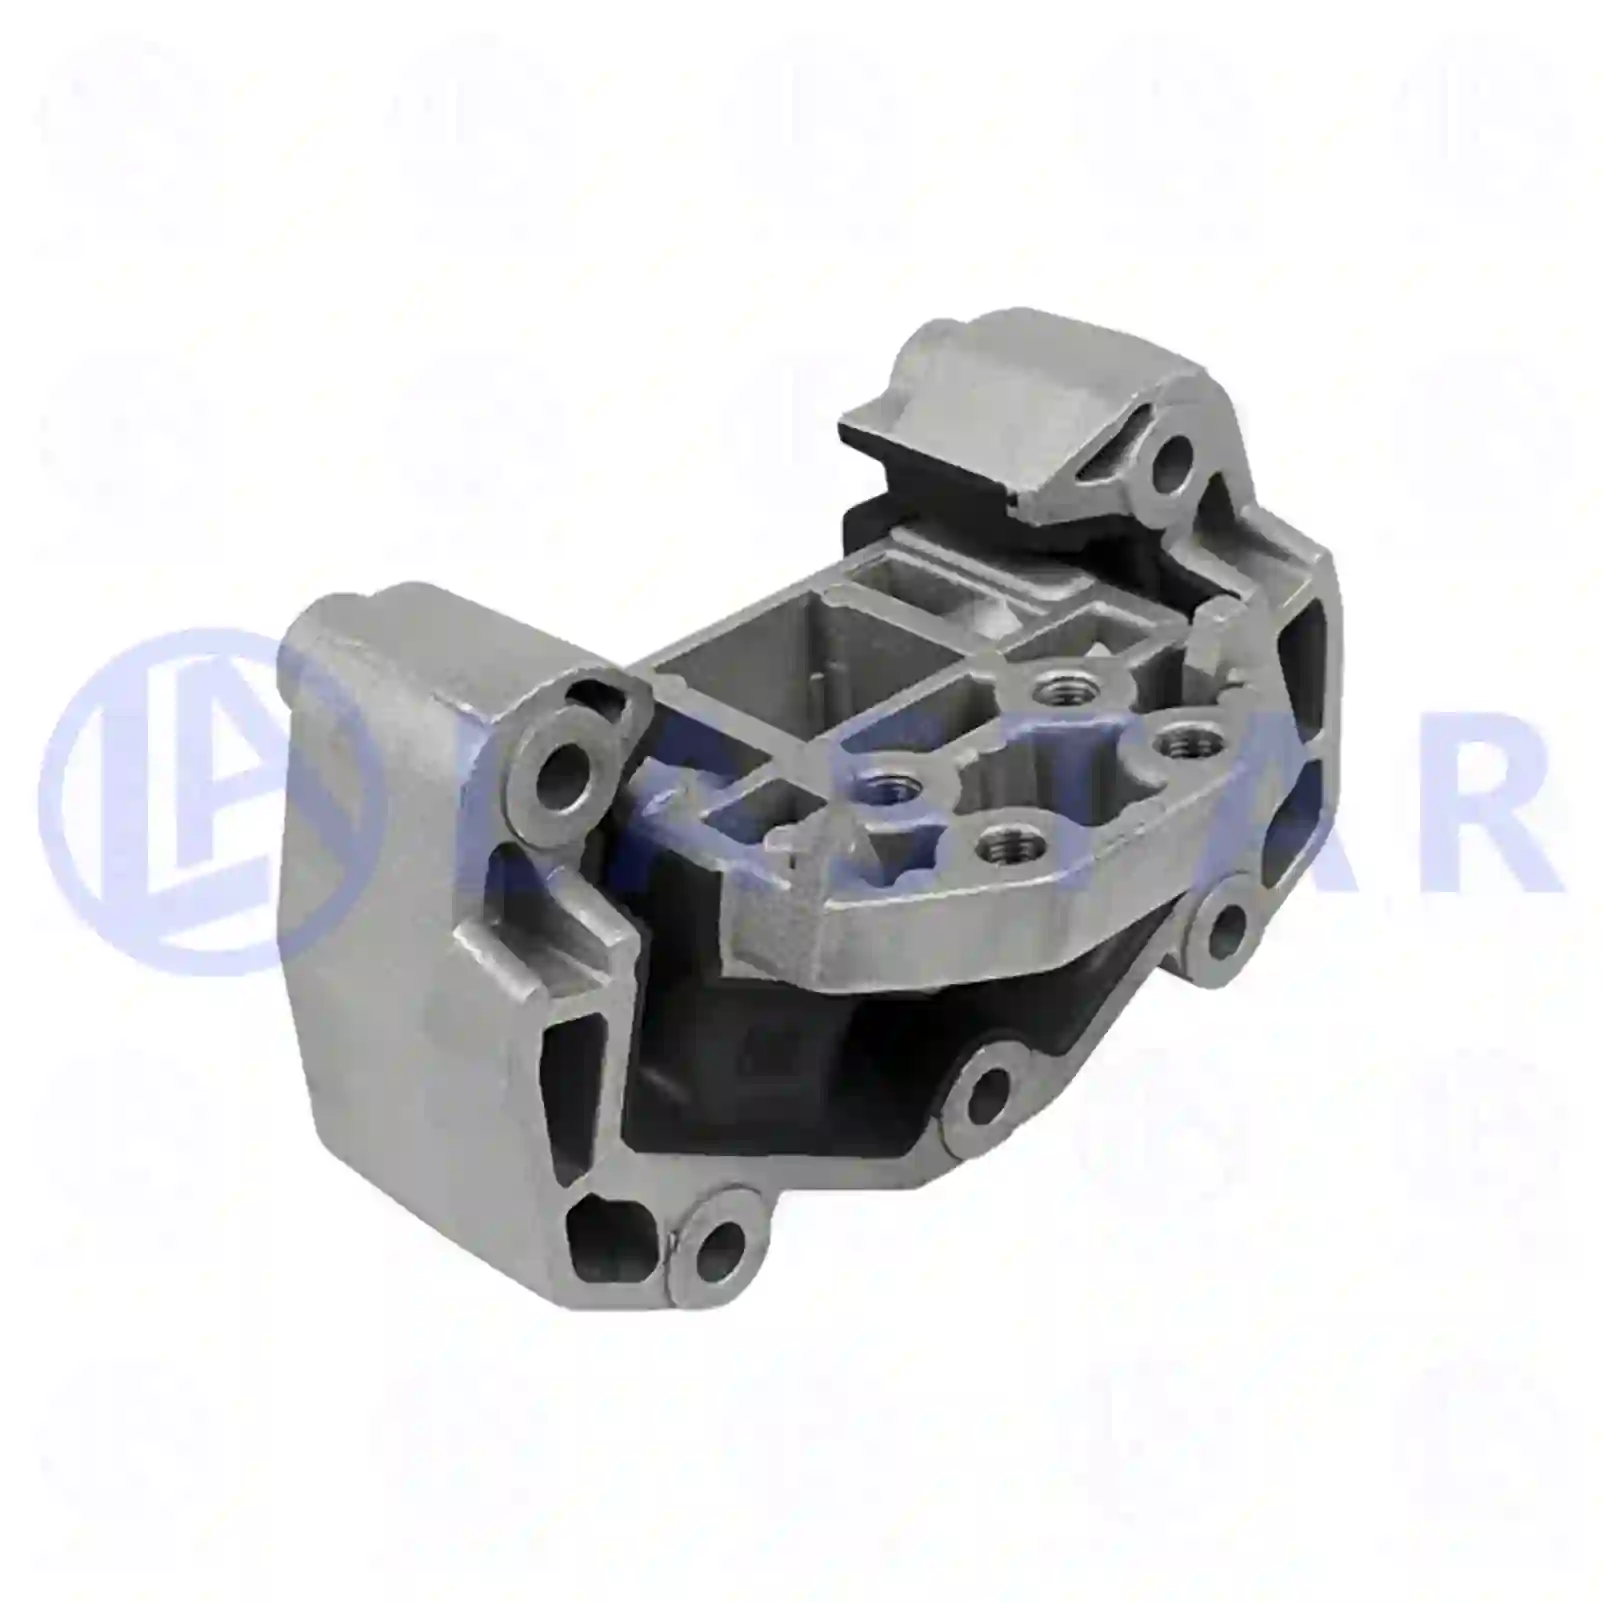 Gearbox mounting, reinforced, 77733587, 1371725, ZG30439-0008, , ||  77733587 Lastar Spare Part | Truck Spare Parts, Auotomotive Spare Parts Gearbox mounting, reinforced, 77733587, 1371725, ZG30439-0008, , ||  77733587 Lastar Spare Part | Truck Spare Parts, Auotomotive Spare Parts